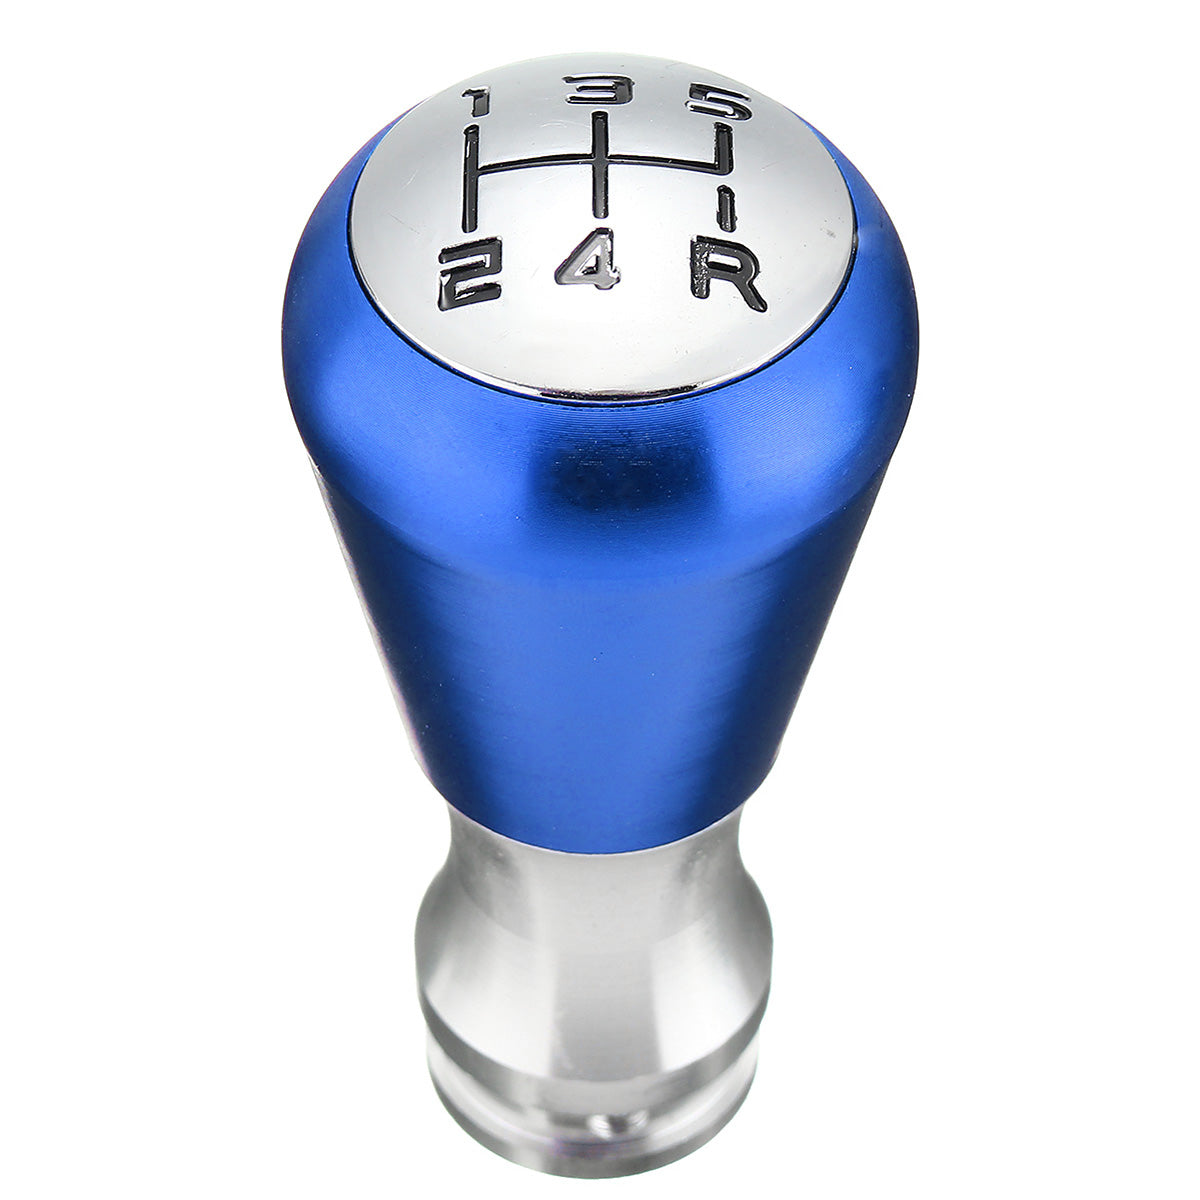 Royal Blue 5 Speed Manual Gear Shift Knob Aluminum Alloy Black/Blue/Red with Adapter For Peugeot 405 307 206